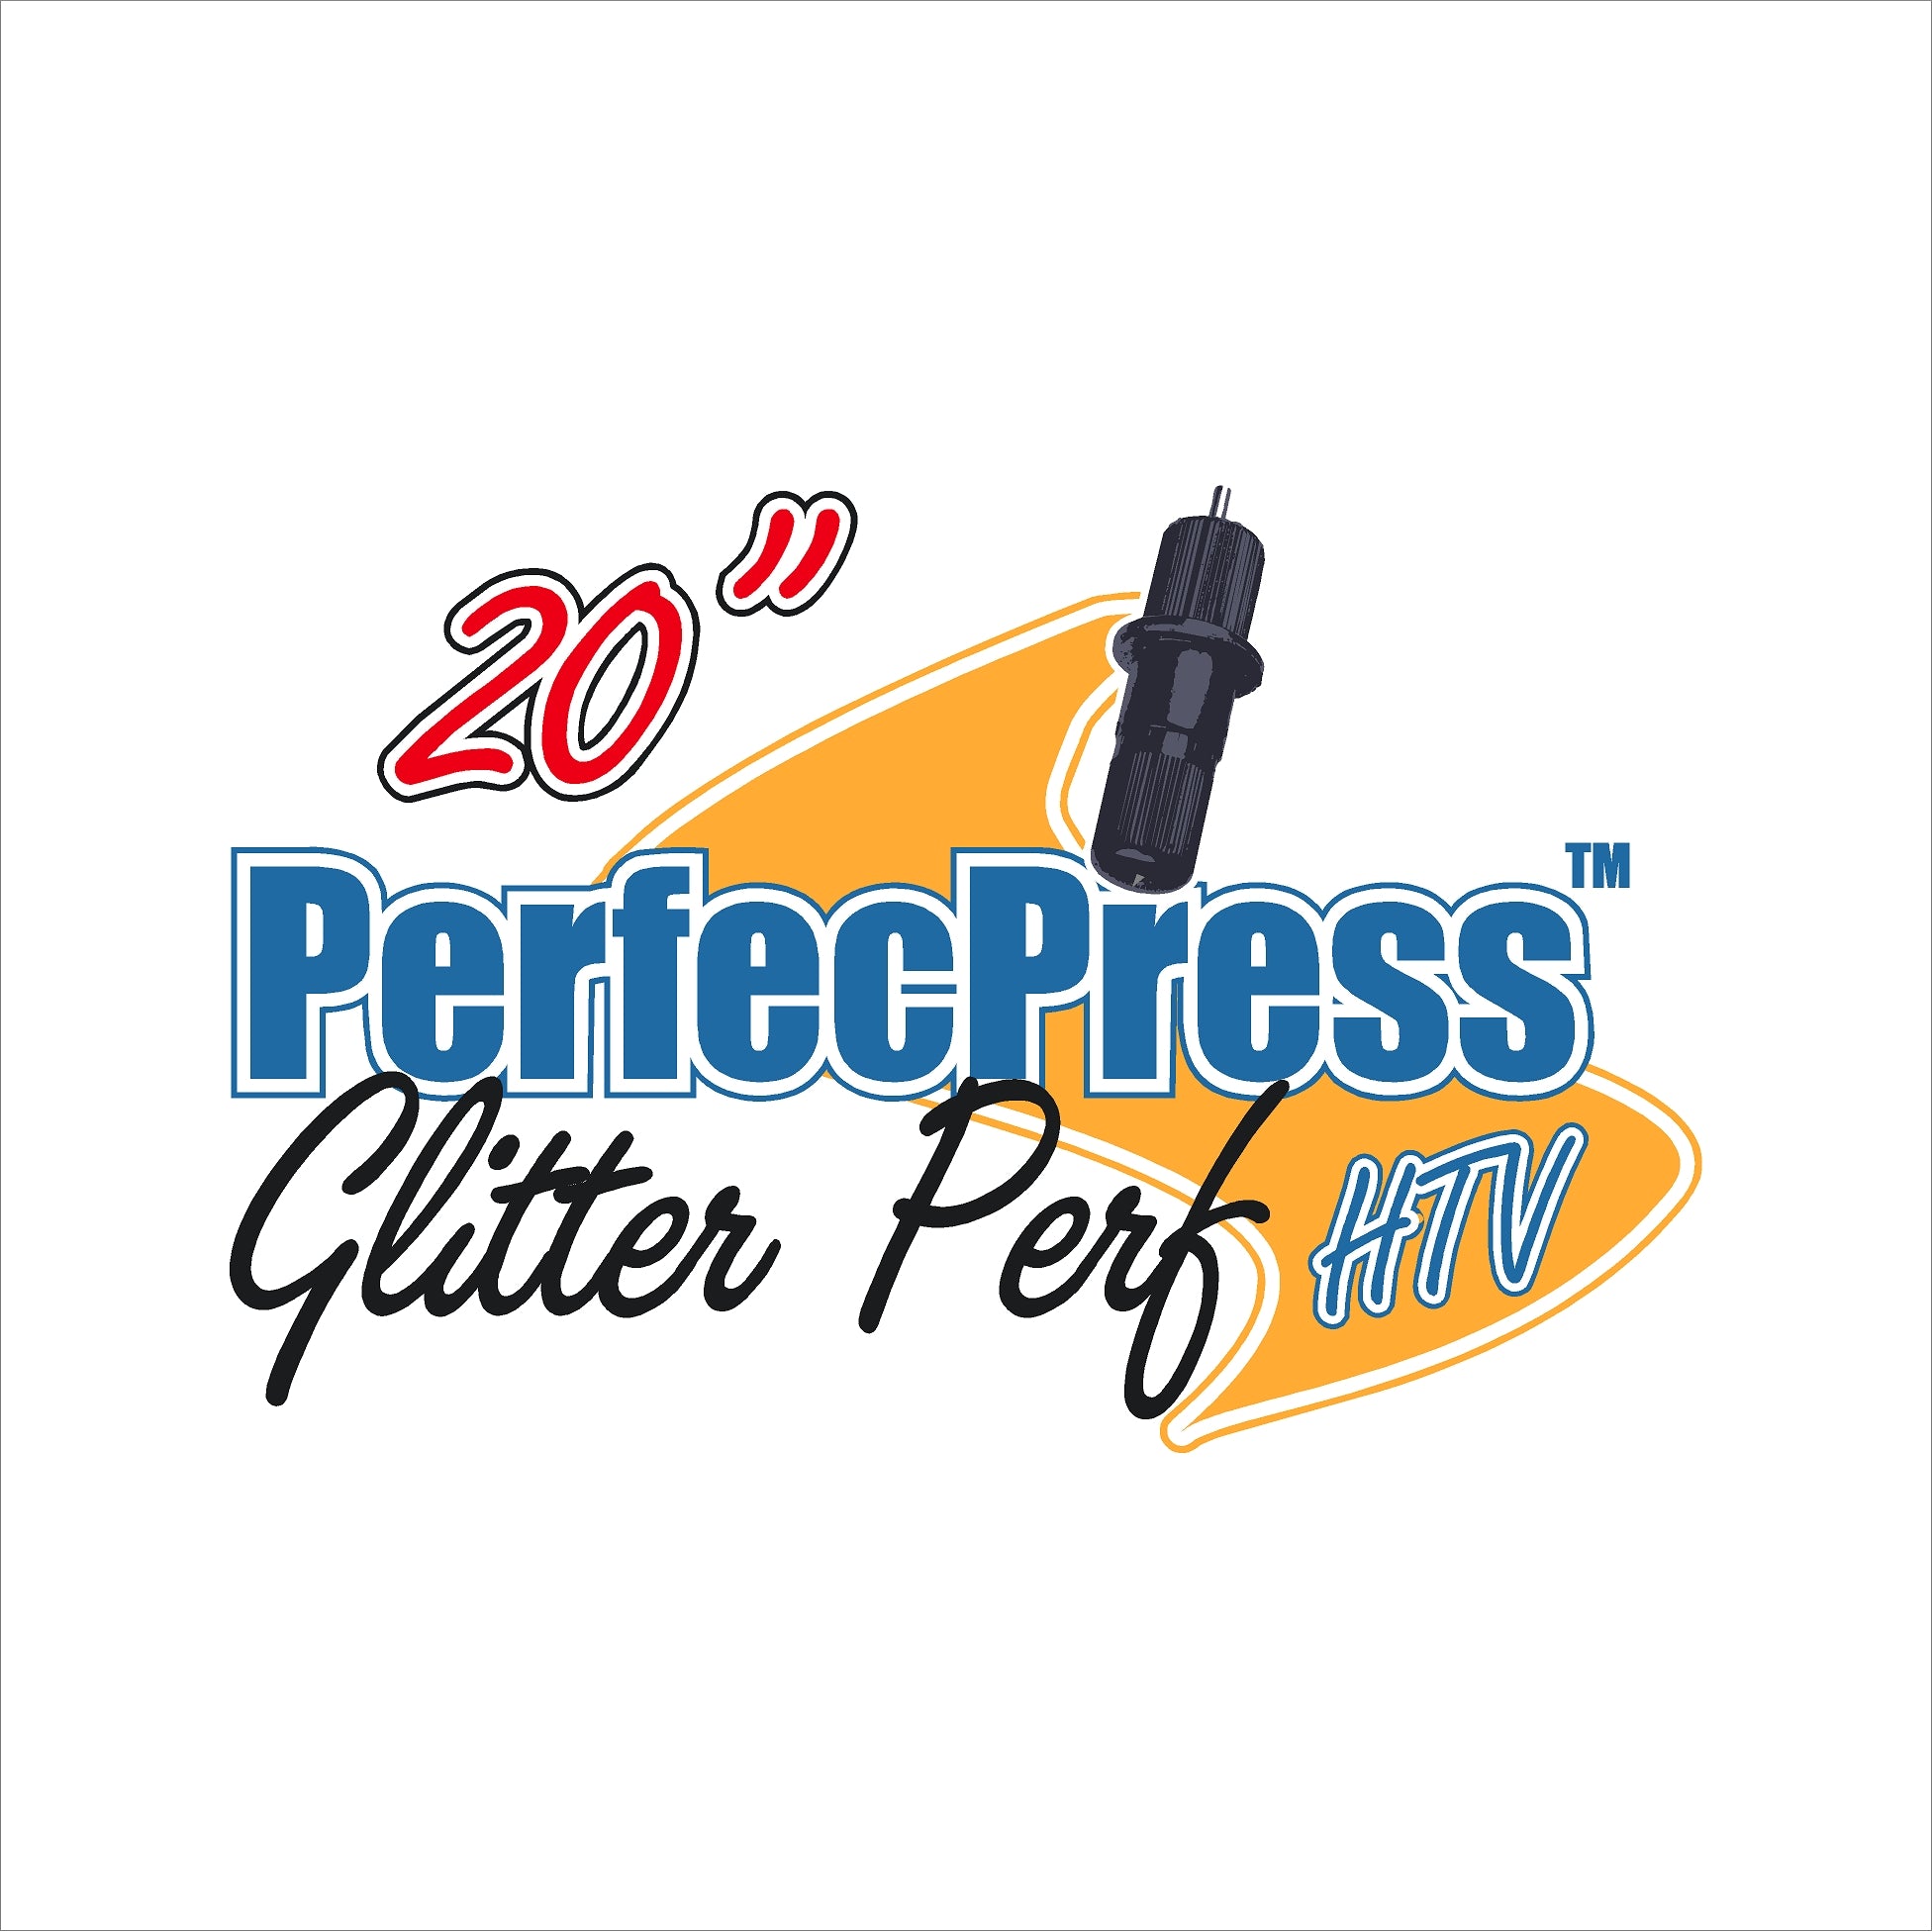 Can You Layer Glitter HTV on Glitter HTV? - Cutting for Business